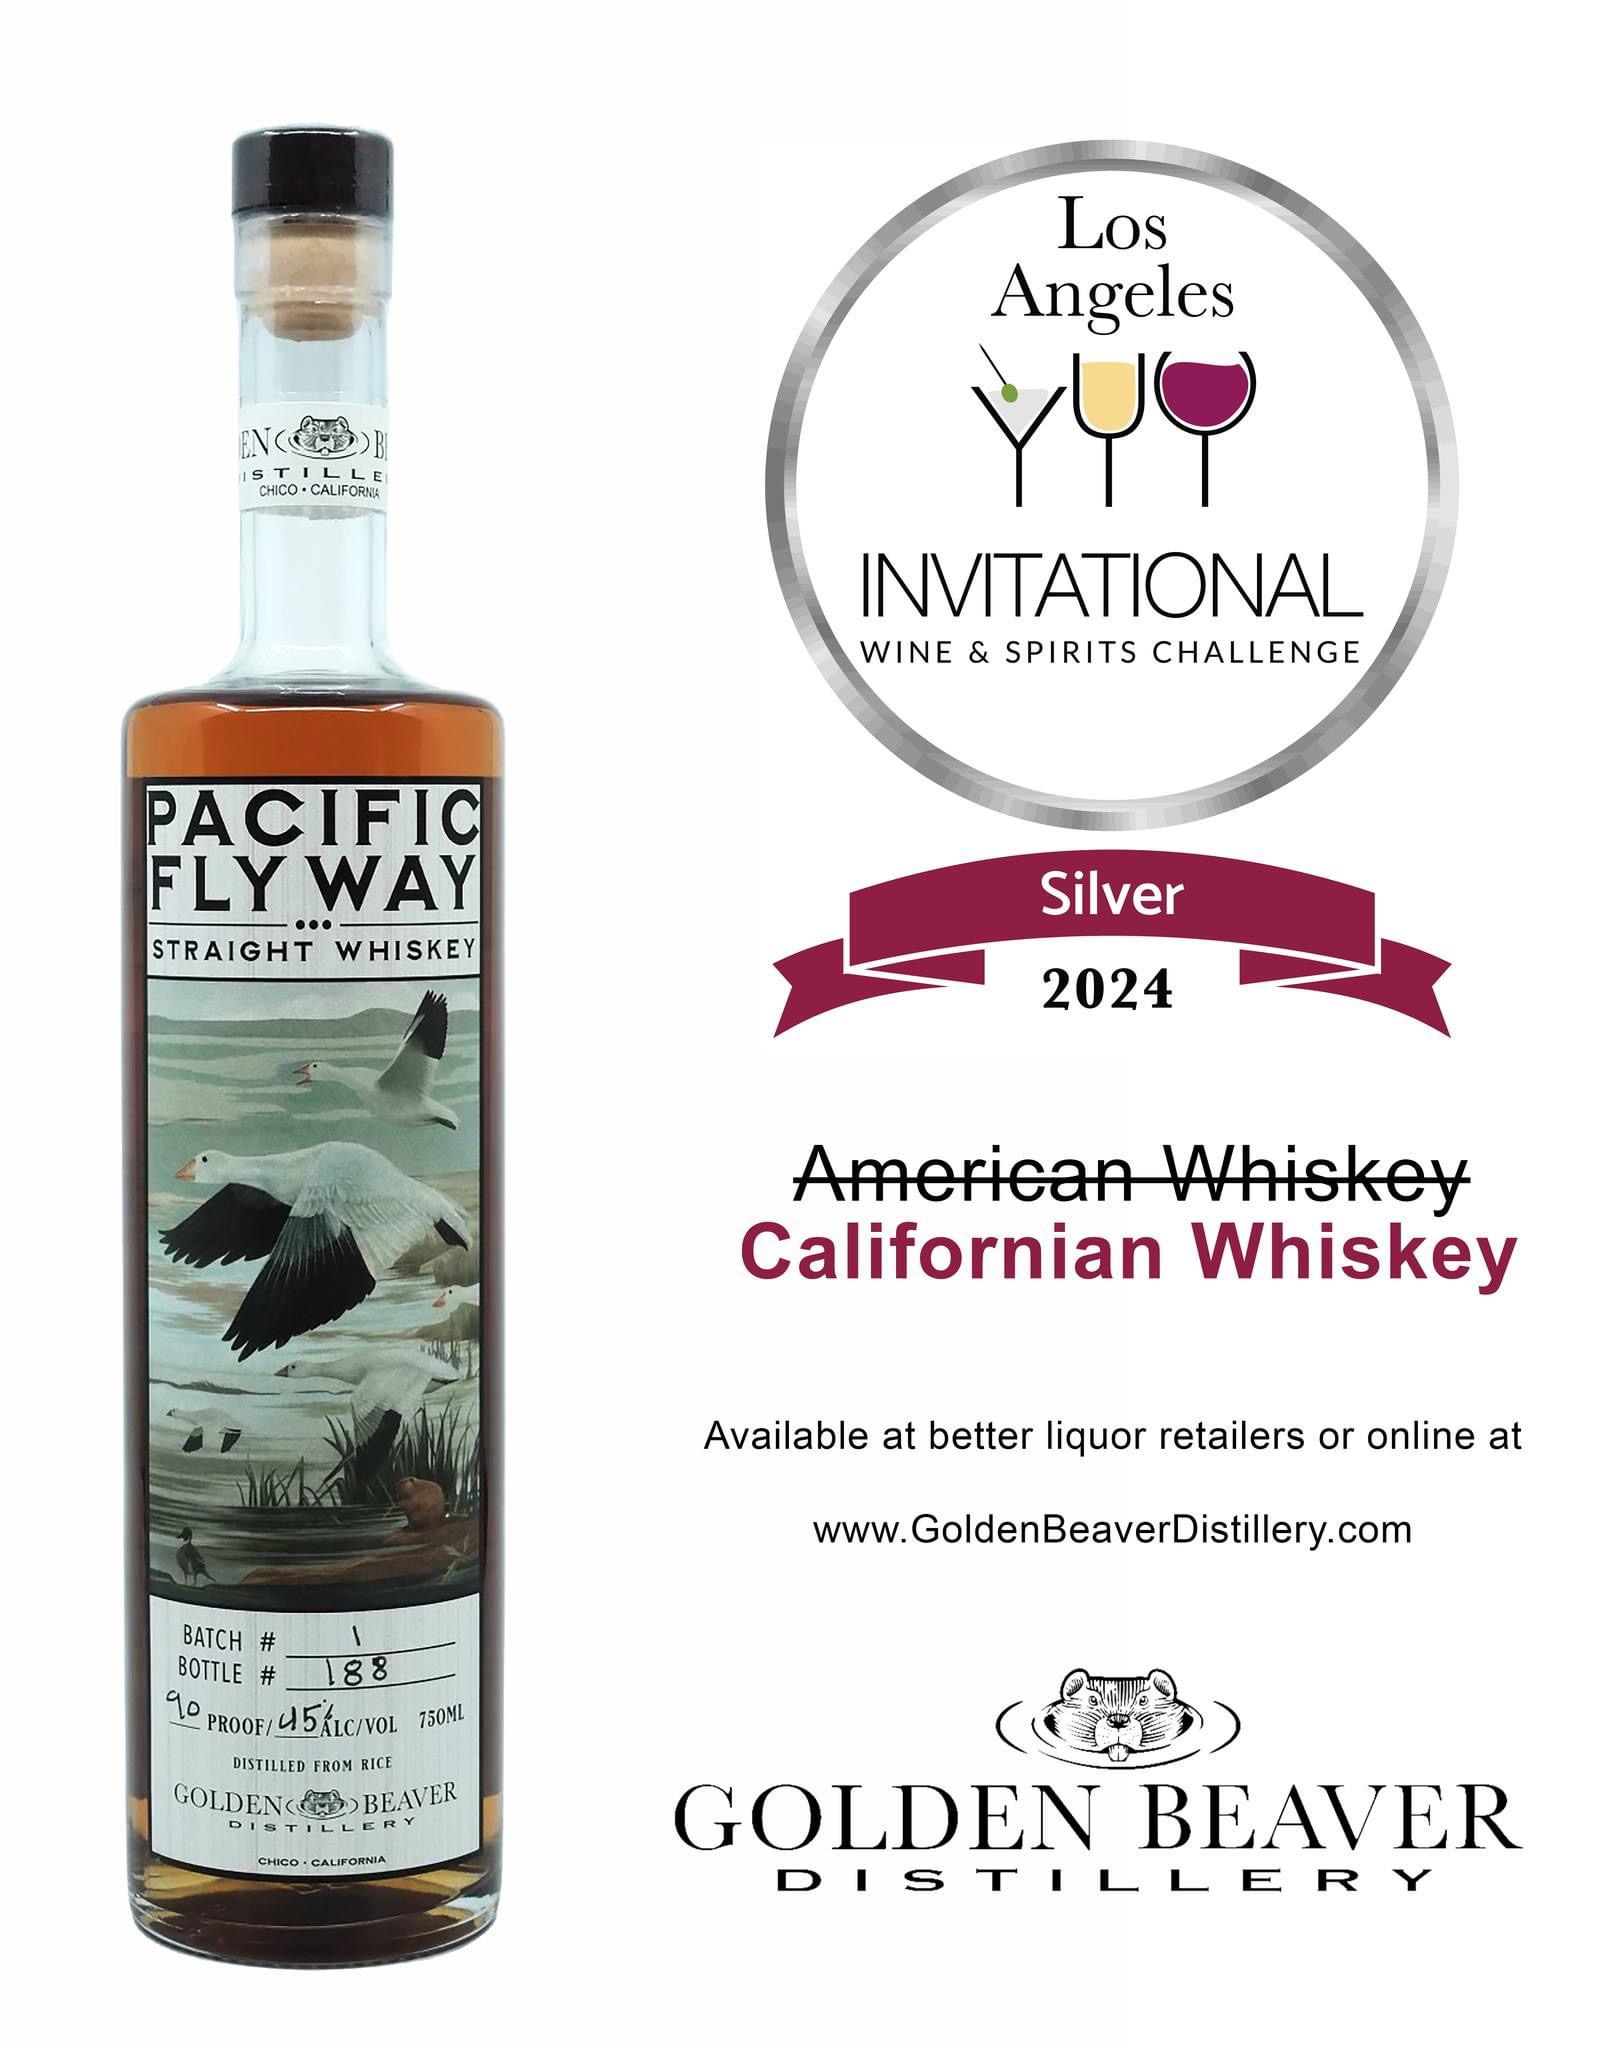 image of Los Angeles invitational award for pacific flyway whisky